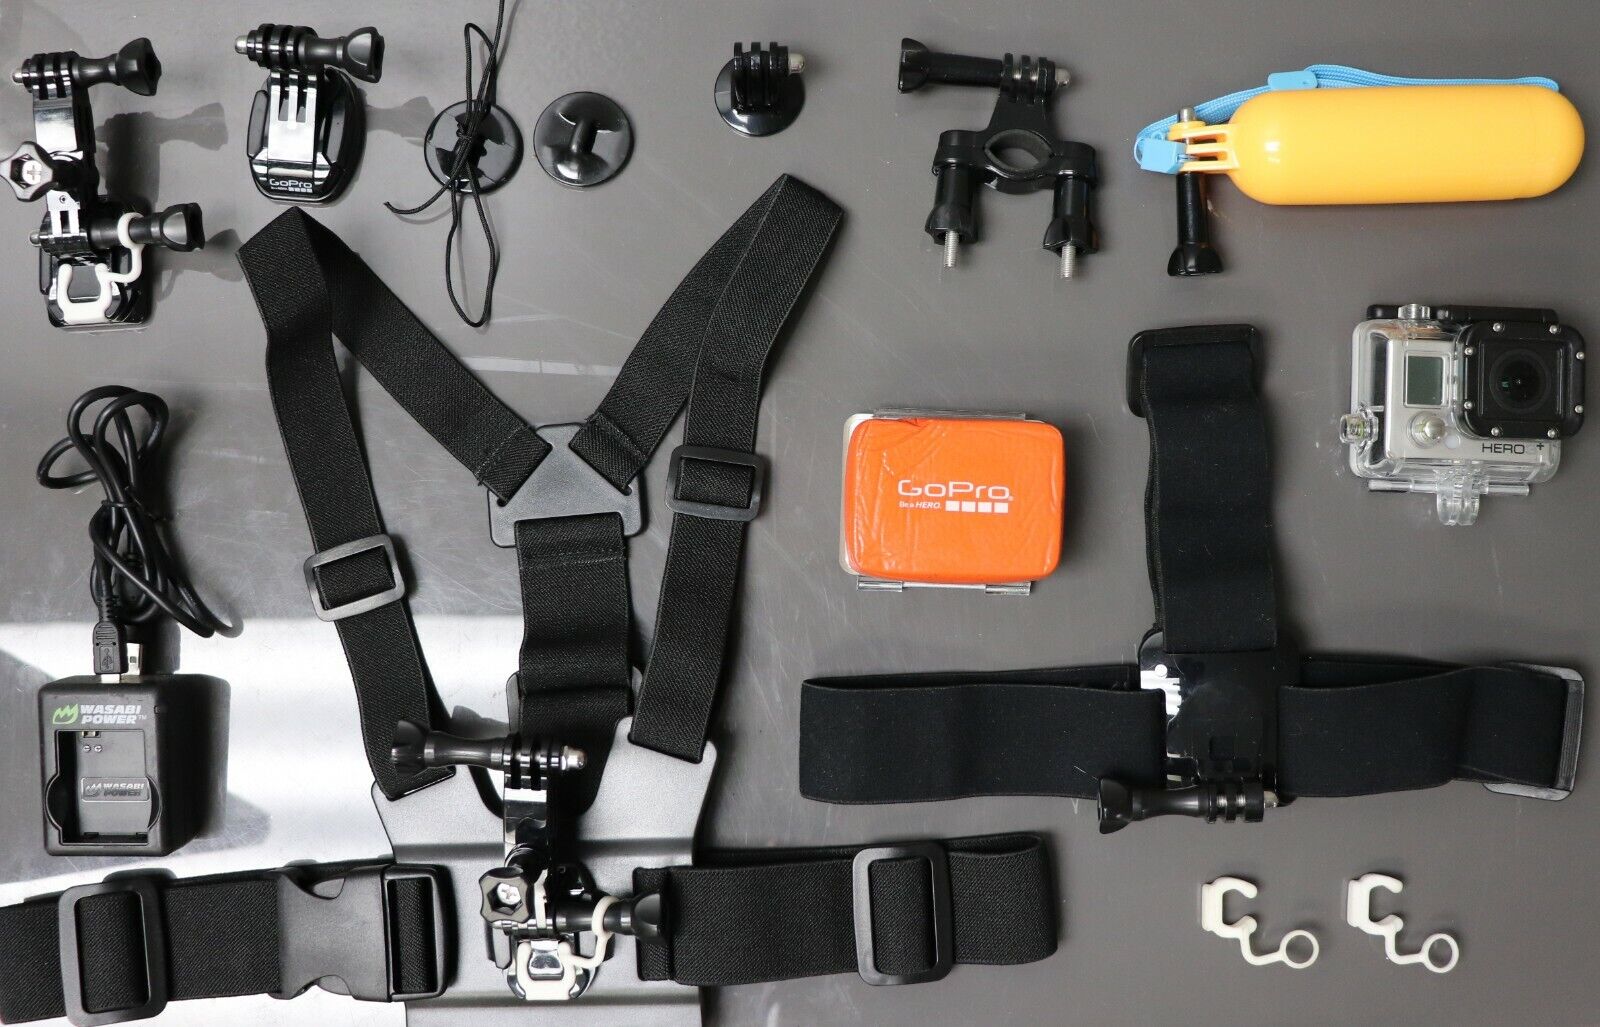 GOPRO 3+ SILVER WITH MULTIPLE ACCESSORIES! - 3243 GoPro CHDHN-301